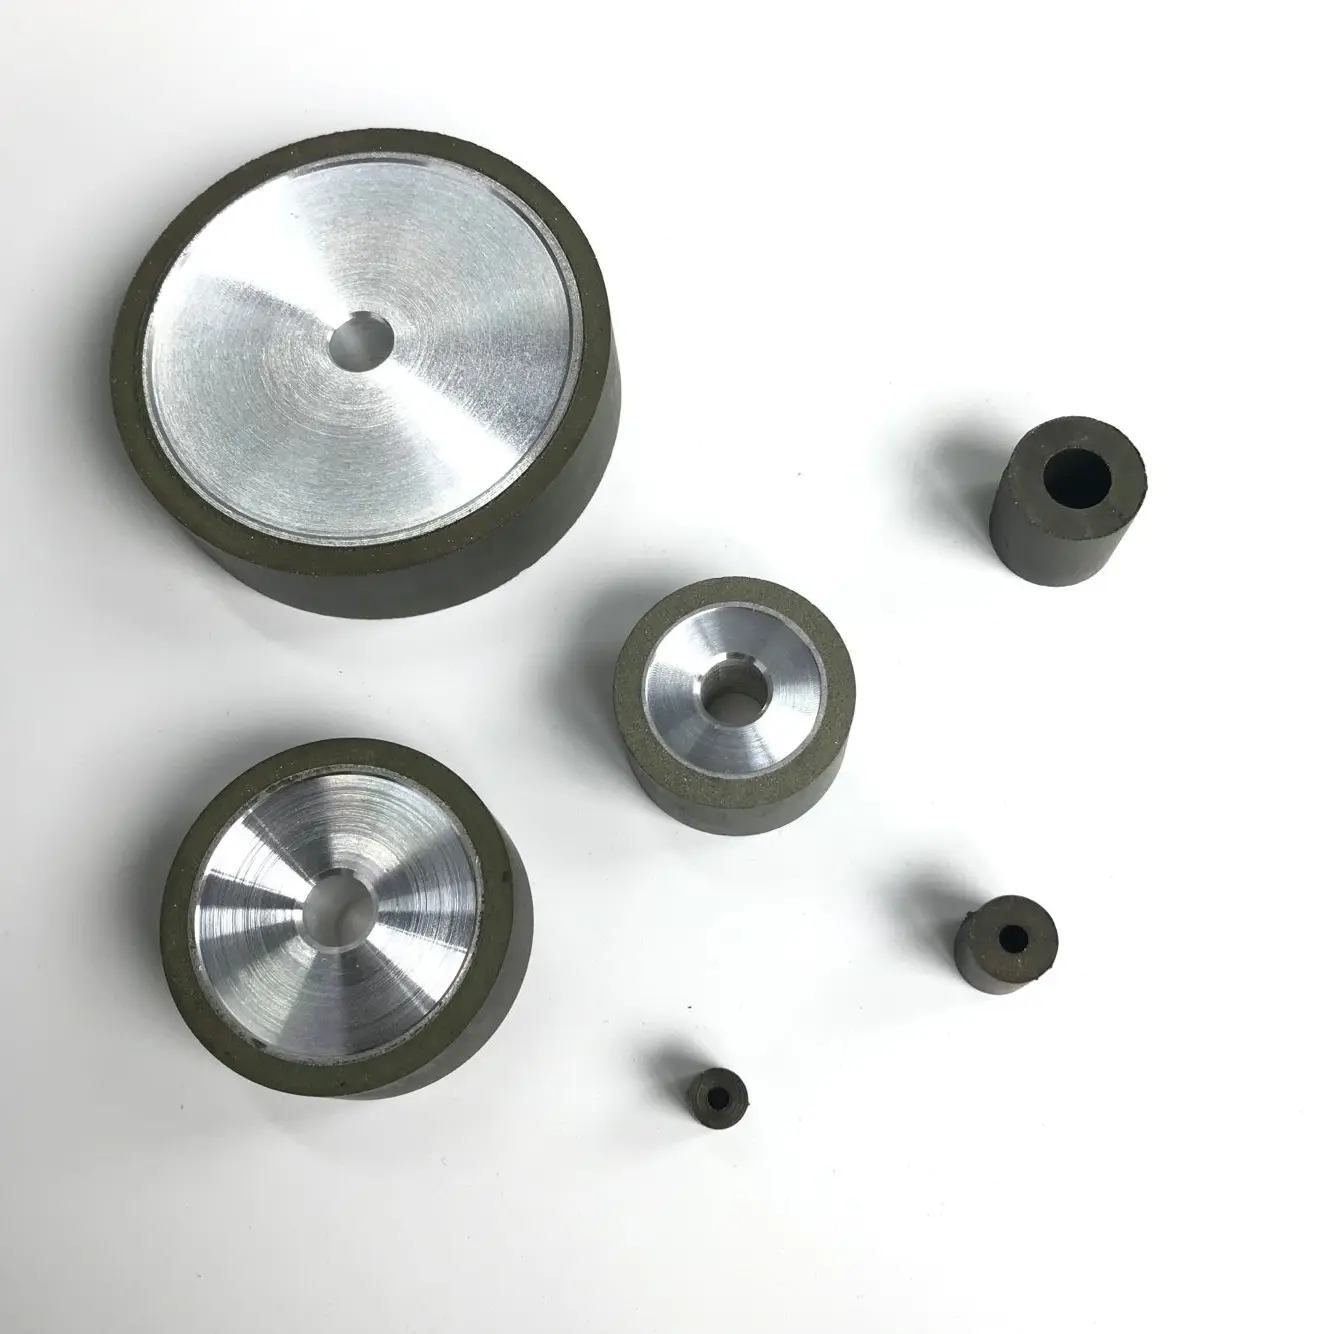 Resin CBN  Grinding Wheel Grit 120 Concentration 100% for Carbide Metal Hard Alloy Tungsten Steel